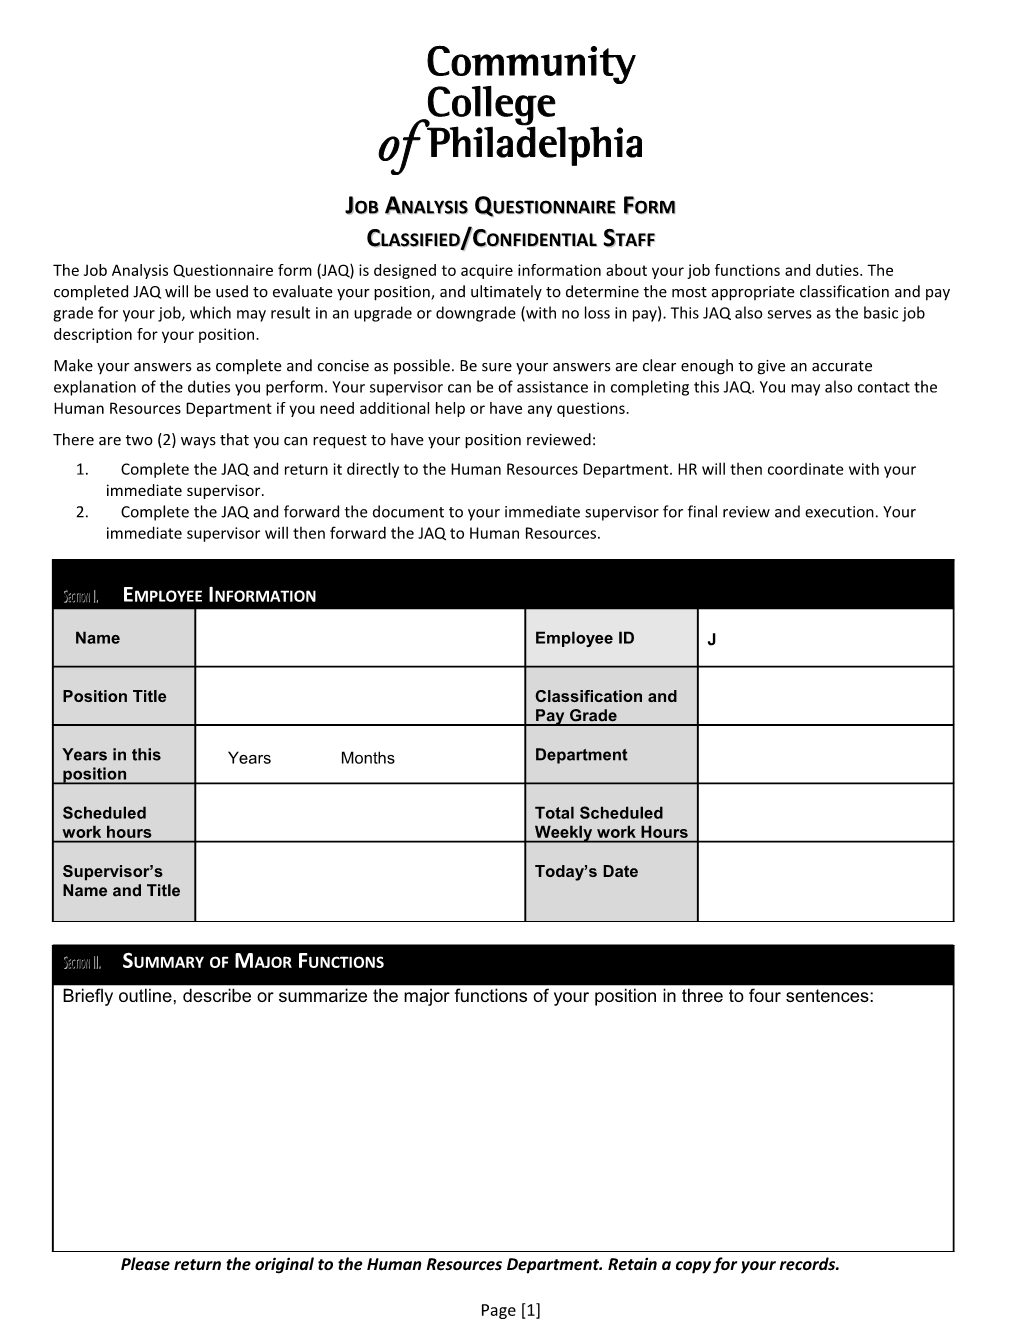 Job Analysis Questionnaire Form